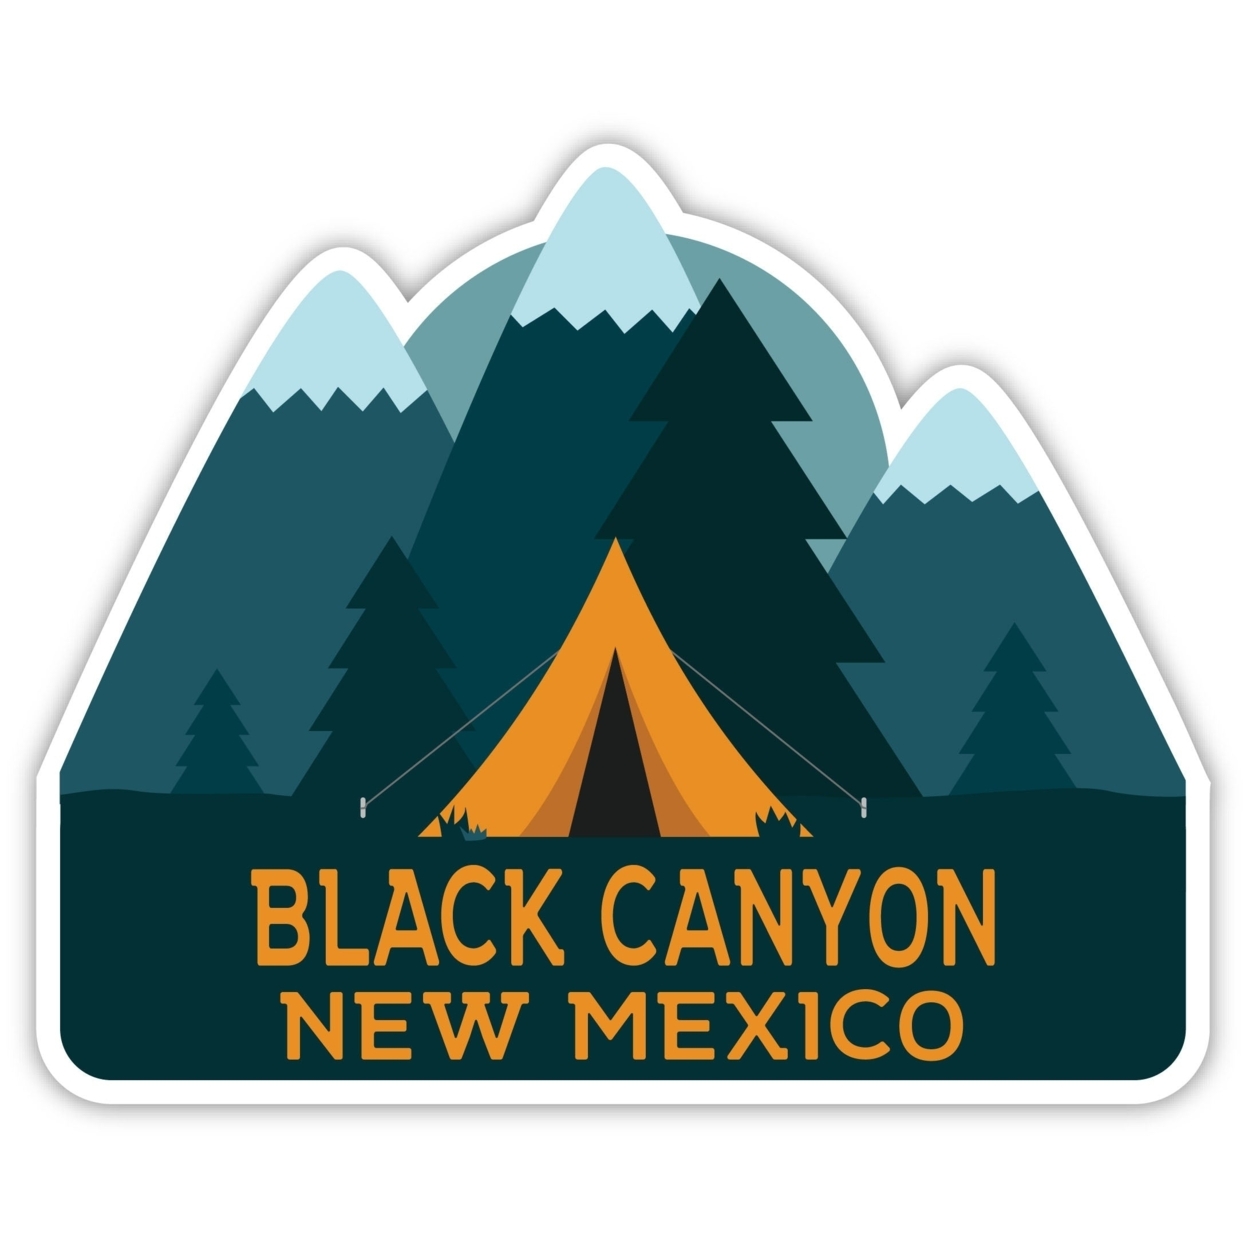 Black Canyon New Mexico Souvenir Decorative Stickers (Choose Theme And Size) - 4-Pack, 4-Inch, Tent